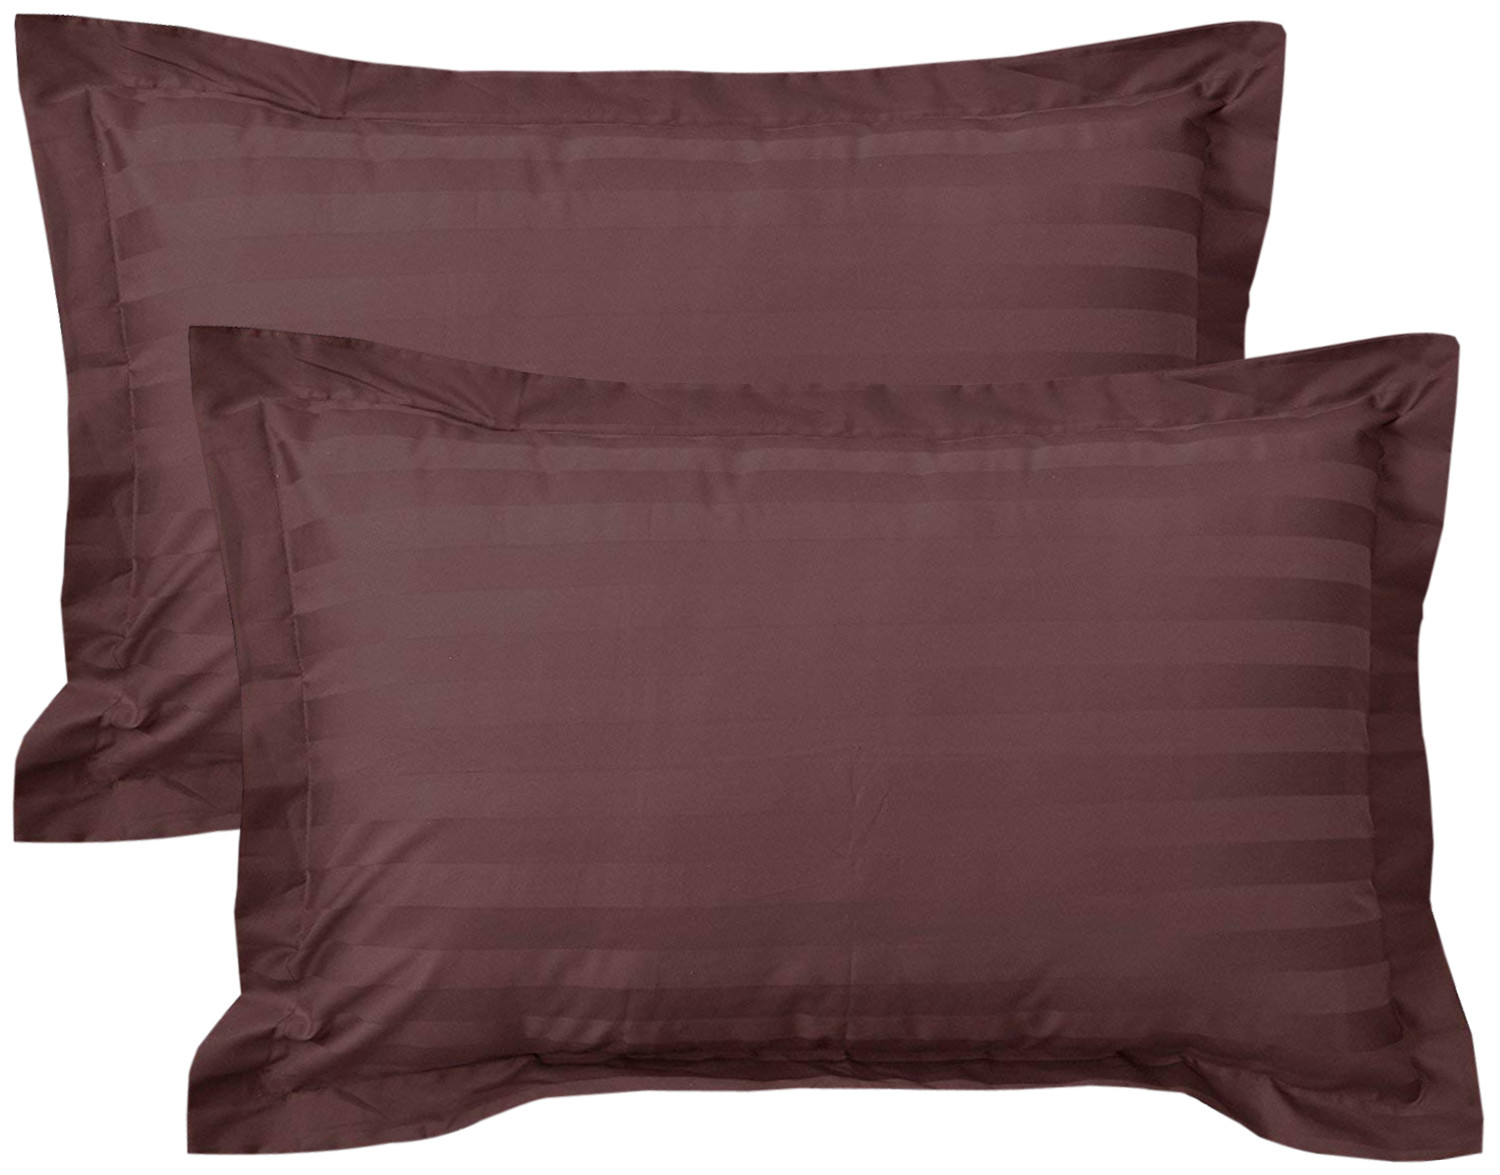 Kuber Industries Lining Design Breathable & Soft Cotton Pillow Cover/Protector/Case- 18x28 Inch,(Brown)-HS43KUBMART26749